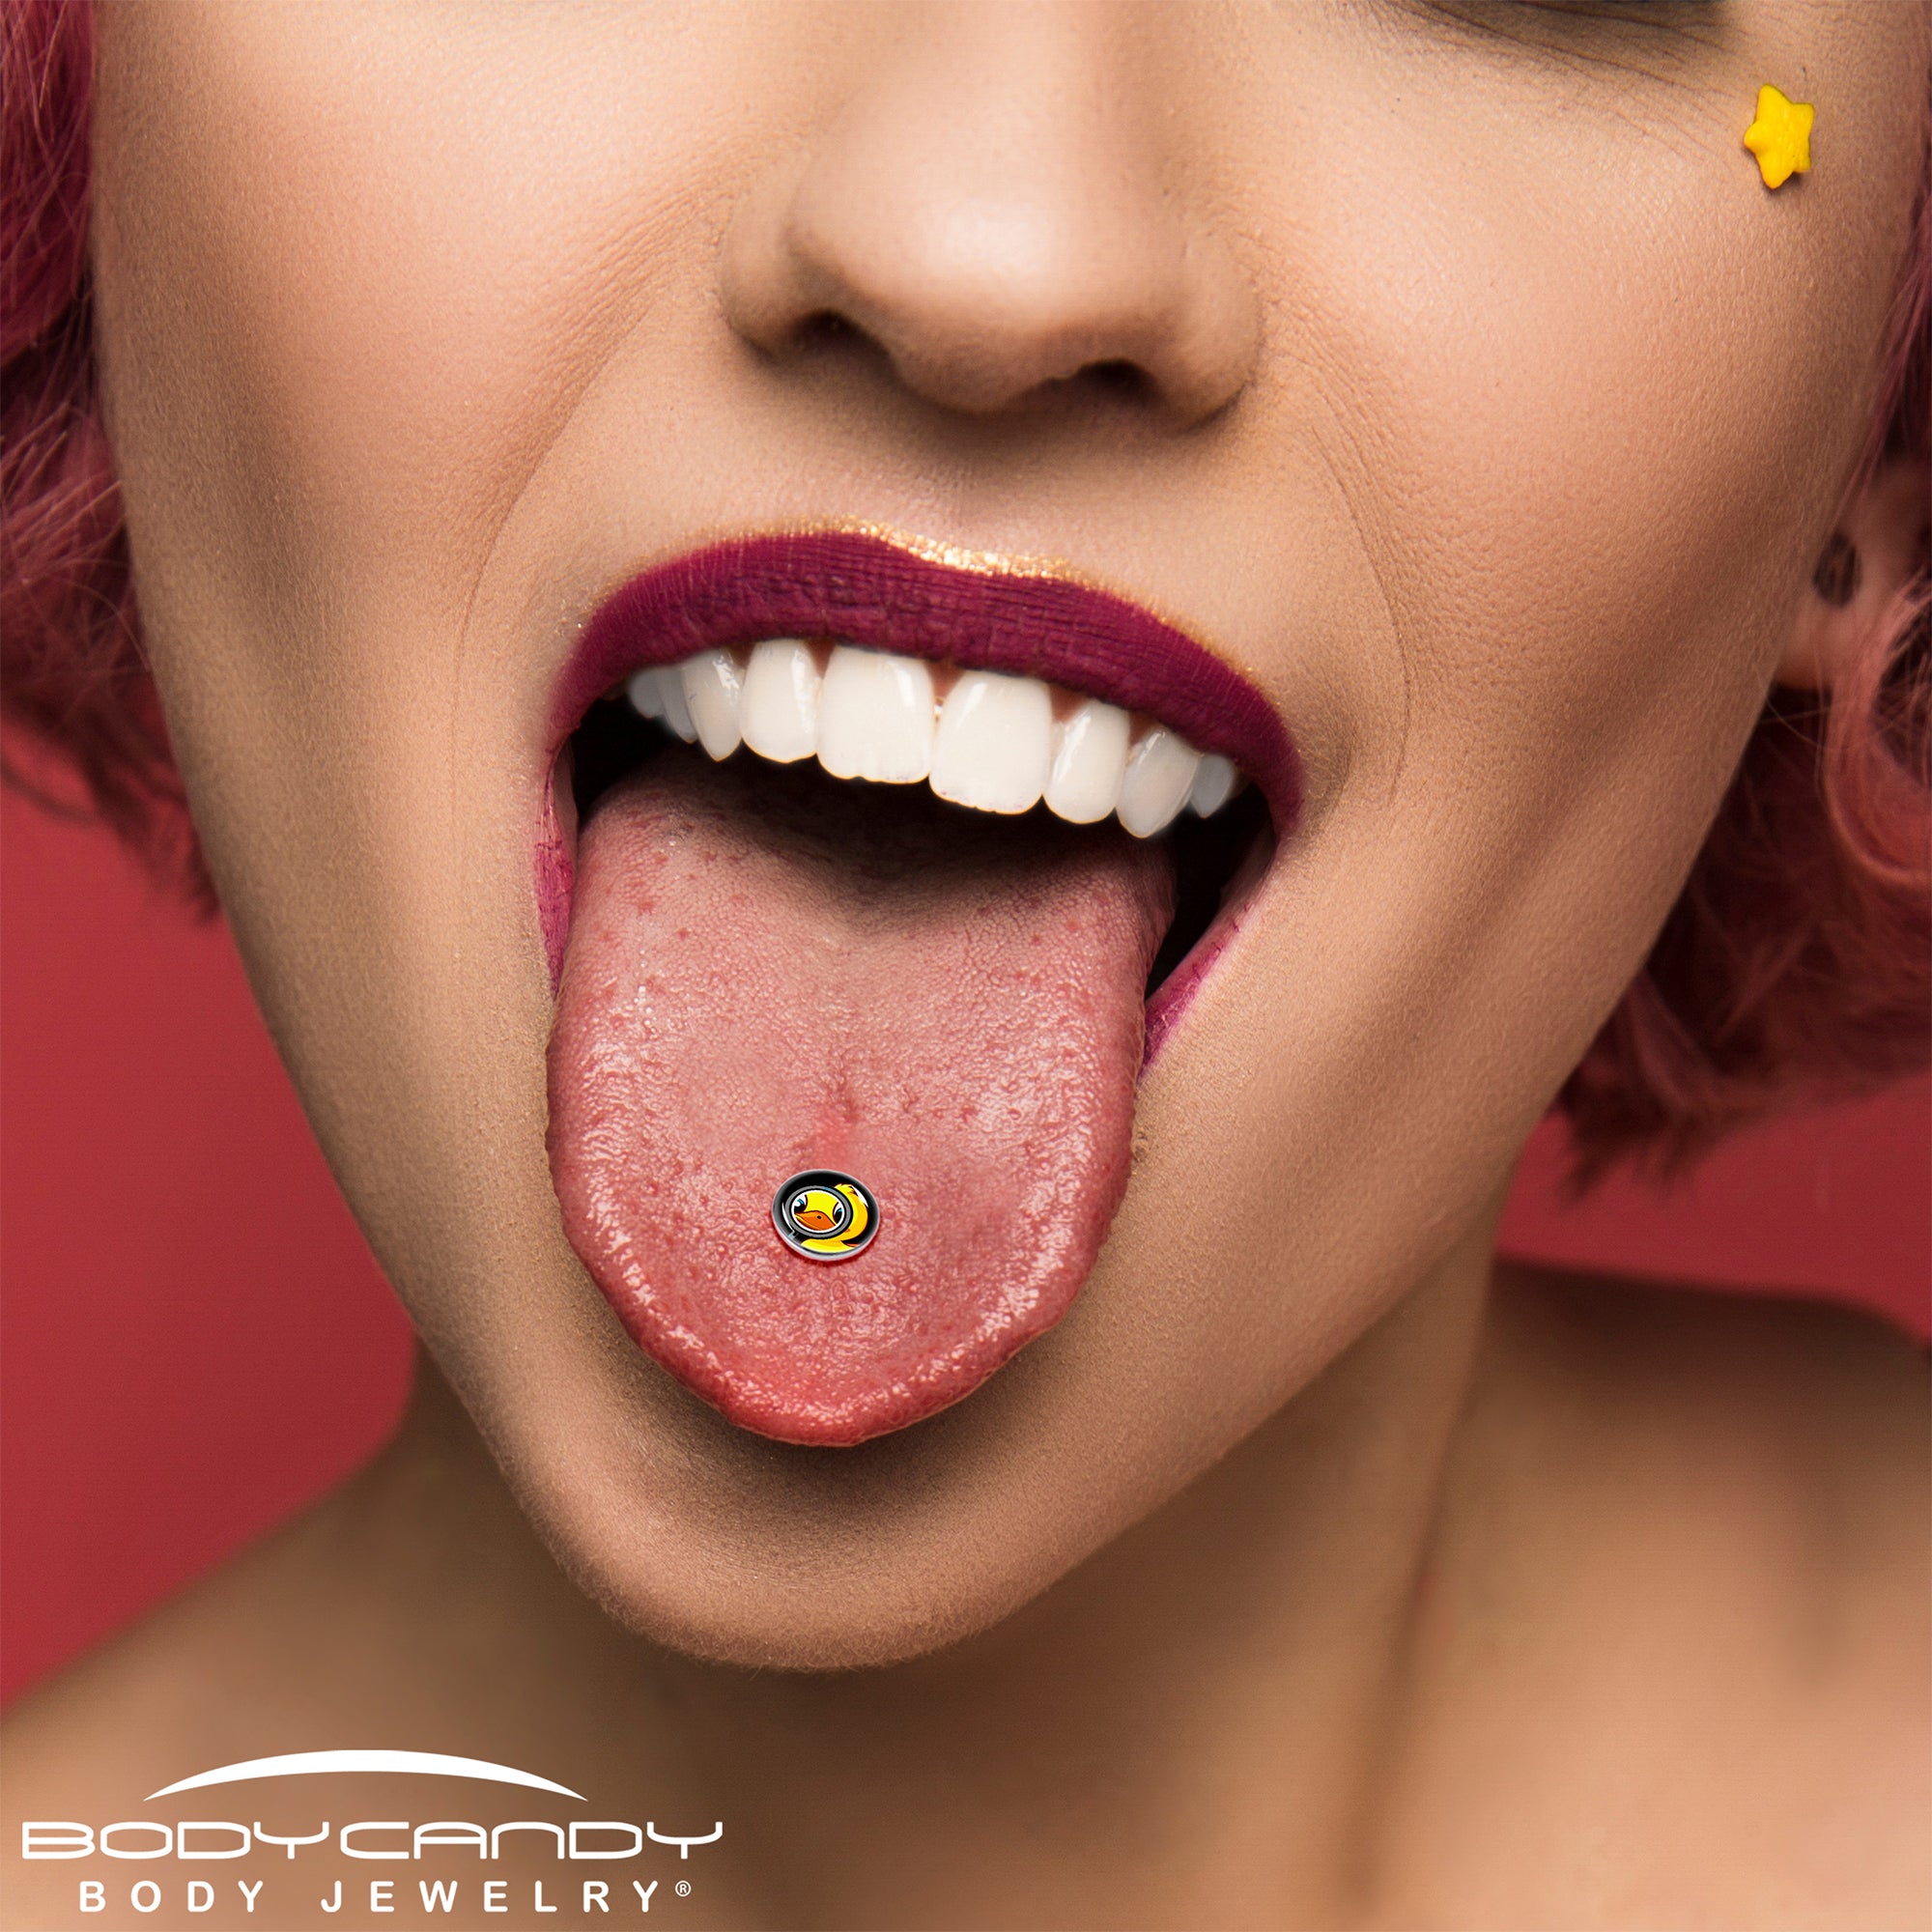 Magnified Yellow Duck Barbell Tongue Ring